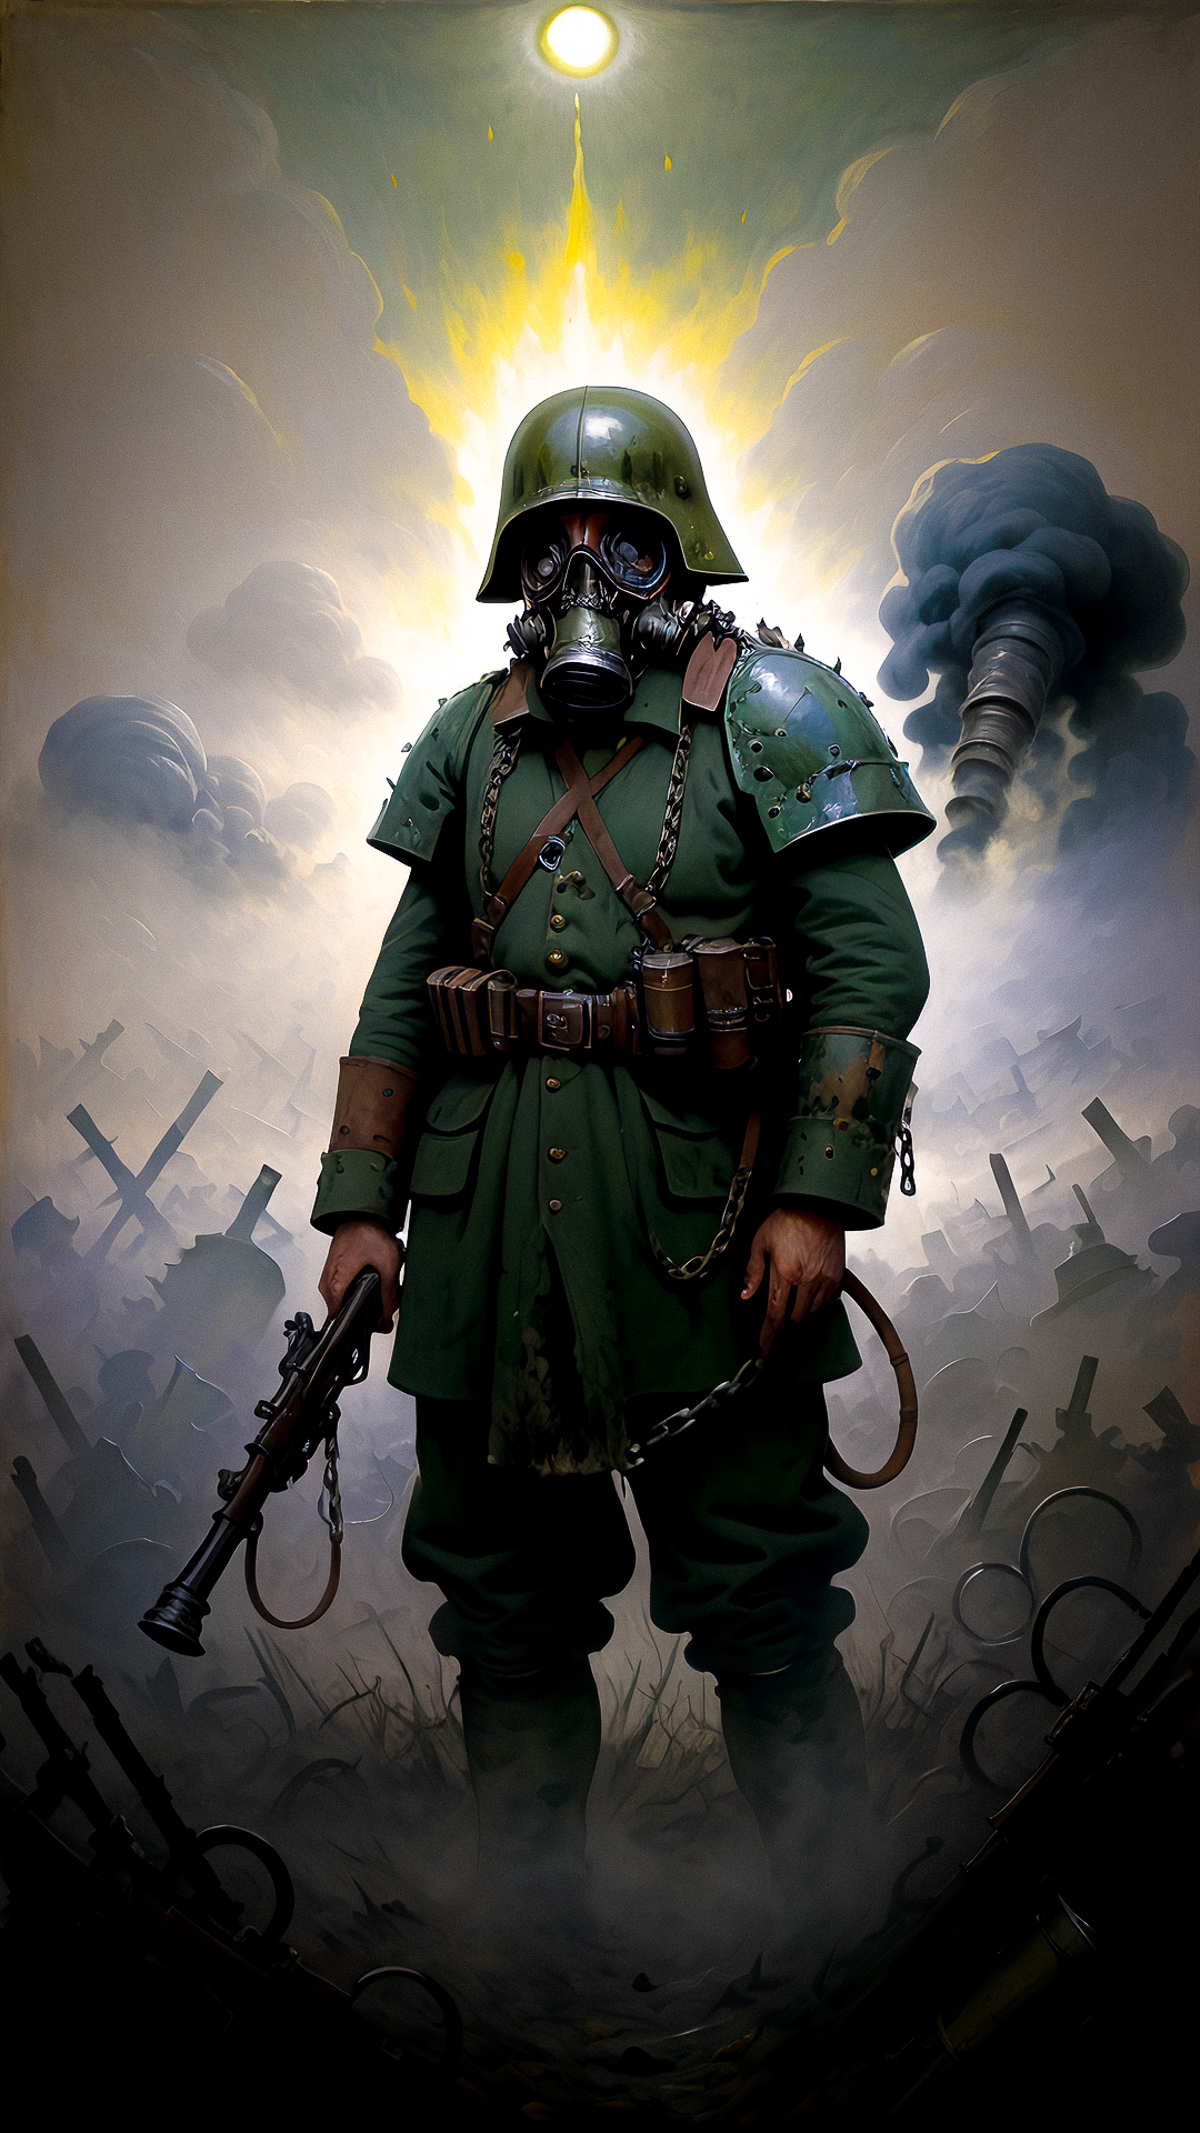 A soldier wearing a gas mask and holding a gun, standing in a battlefield.